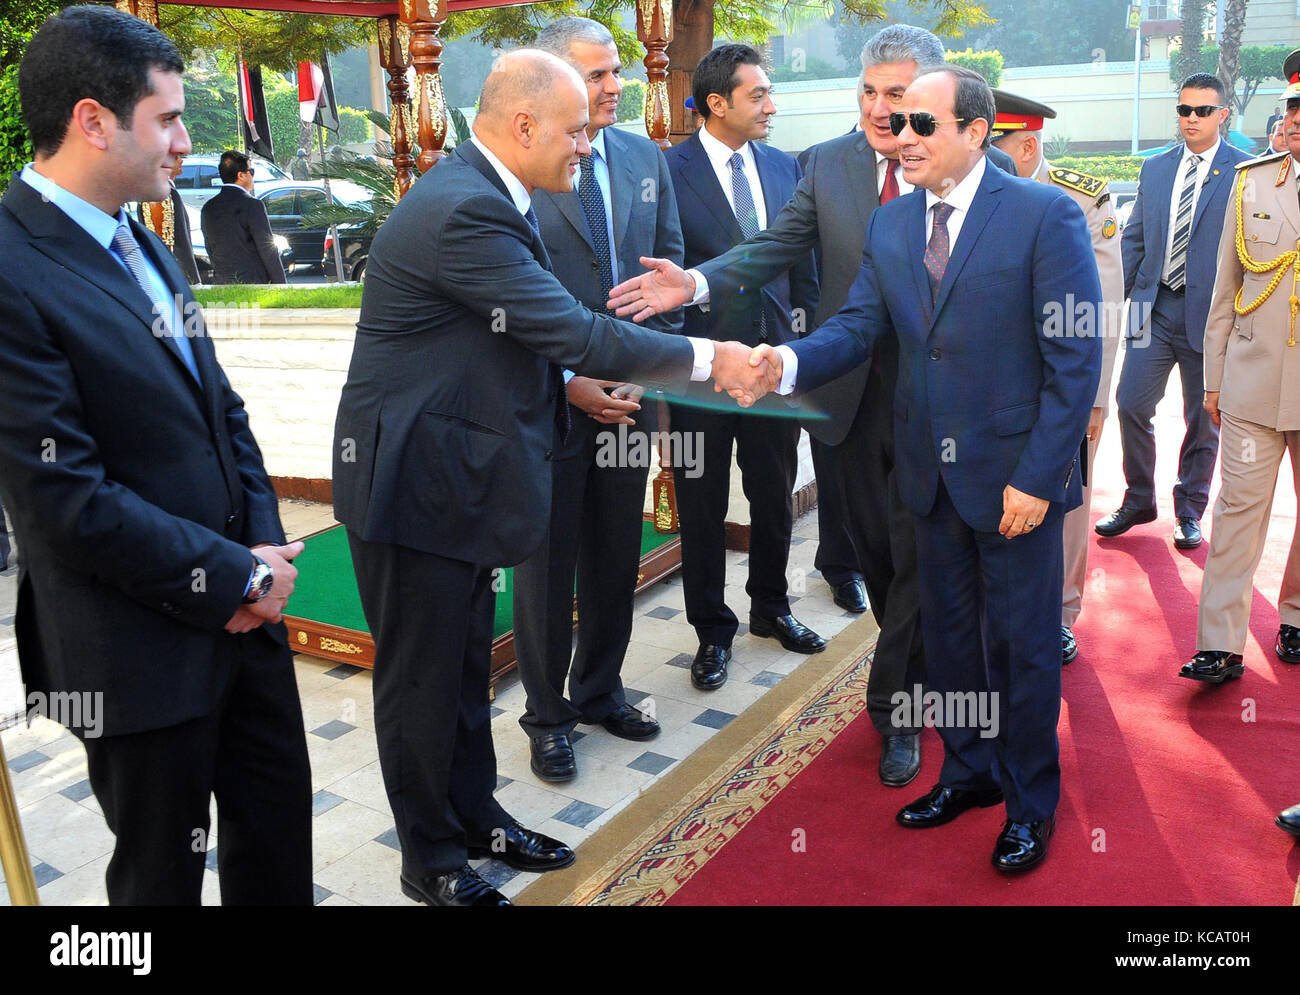 Cairo, Egypt. 4th October, 2017. Egyptian President Abdul Fattah al-Sisi visits the former Egyptian President Gamal Abdel Nasser during a ceremony at the memorial of the Unknown Soldier and tombs of late Egyptian presidents on Octobeober 4, 2017 in Cairo, as part of the celebrations marking the 42th anniversary of Octobeober War Victory Credit: Egyptian President Office/APA Images/ZUMA Wire/Alamy Live News Stock Photo